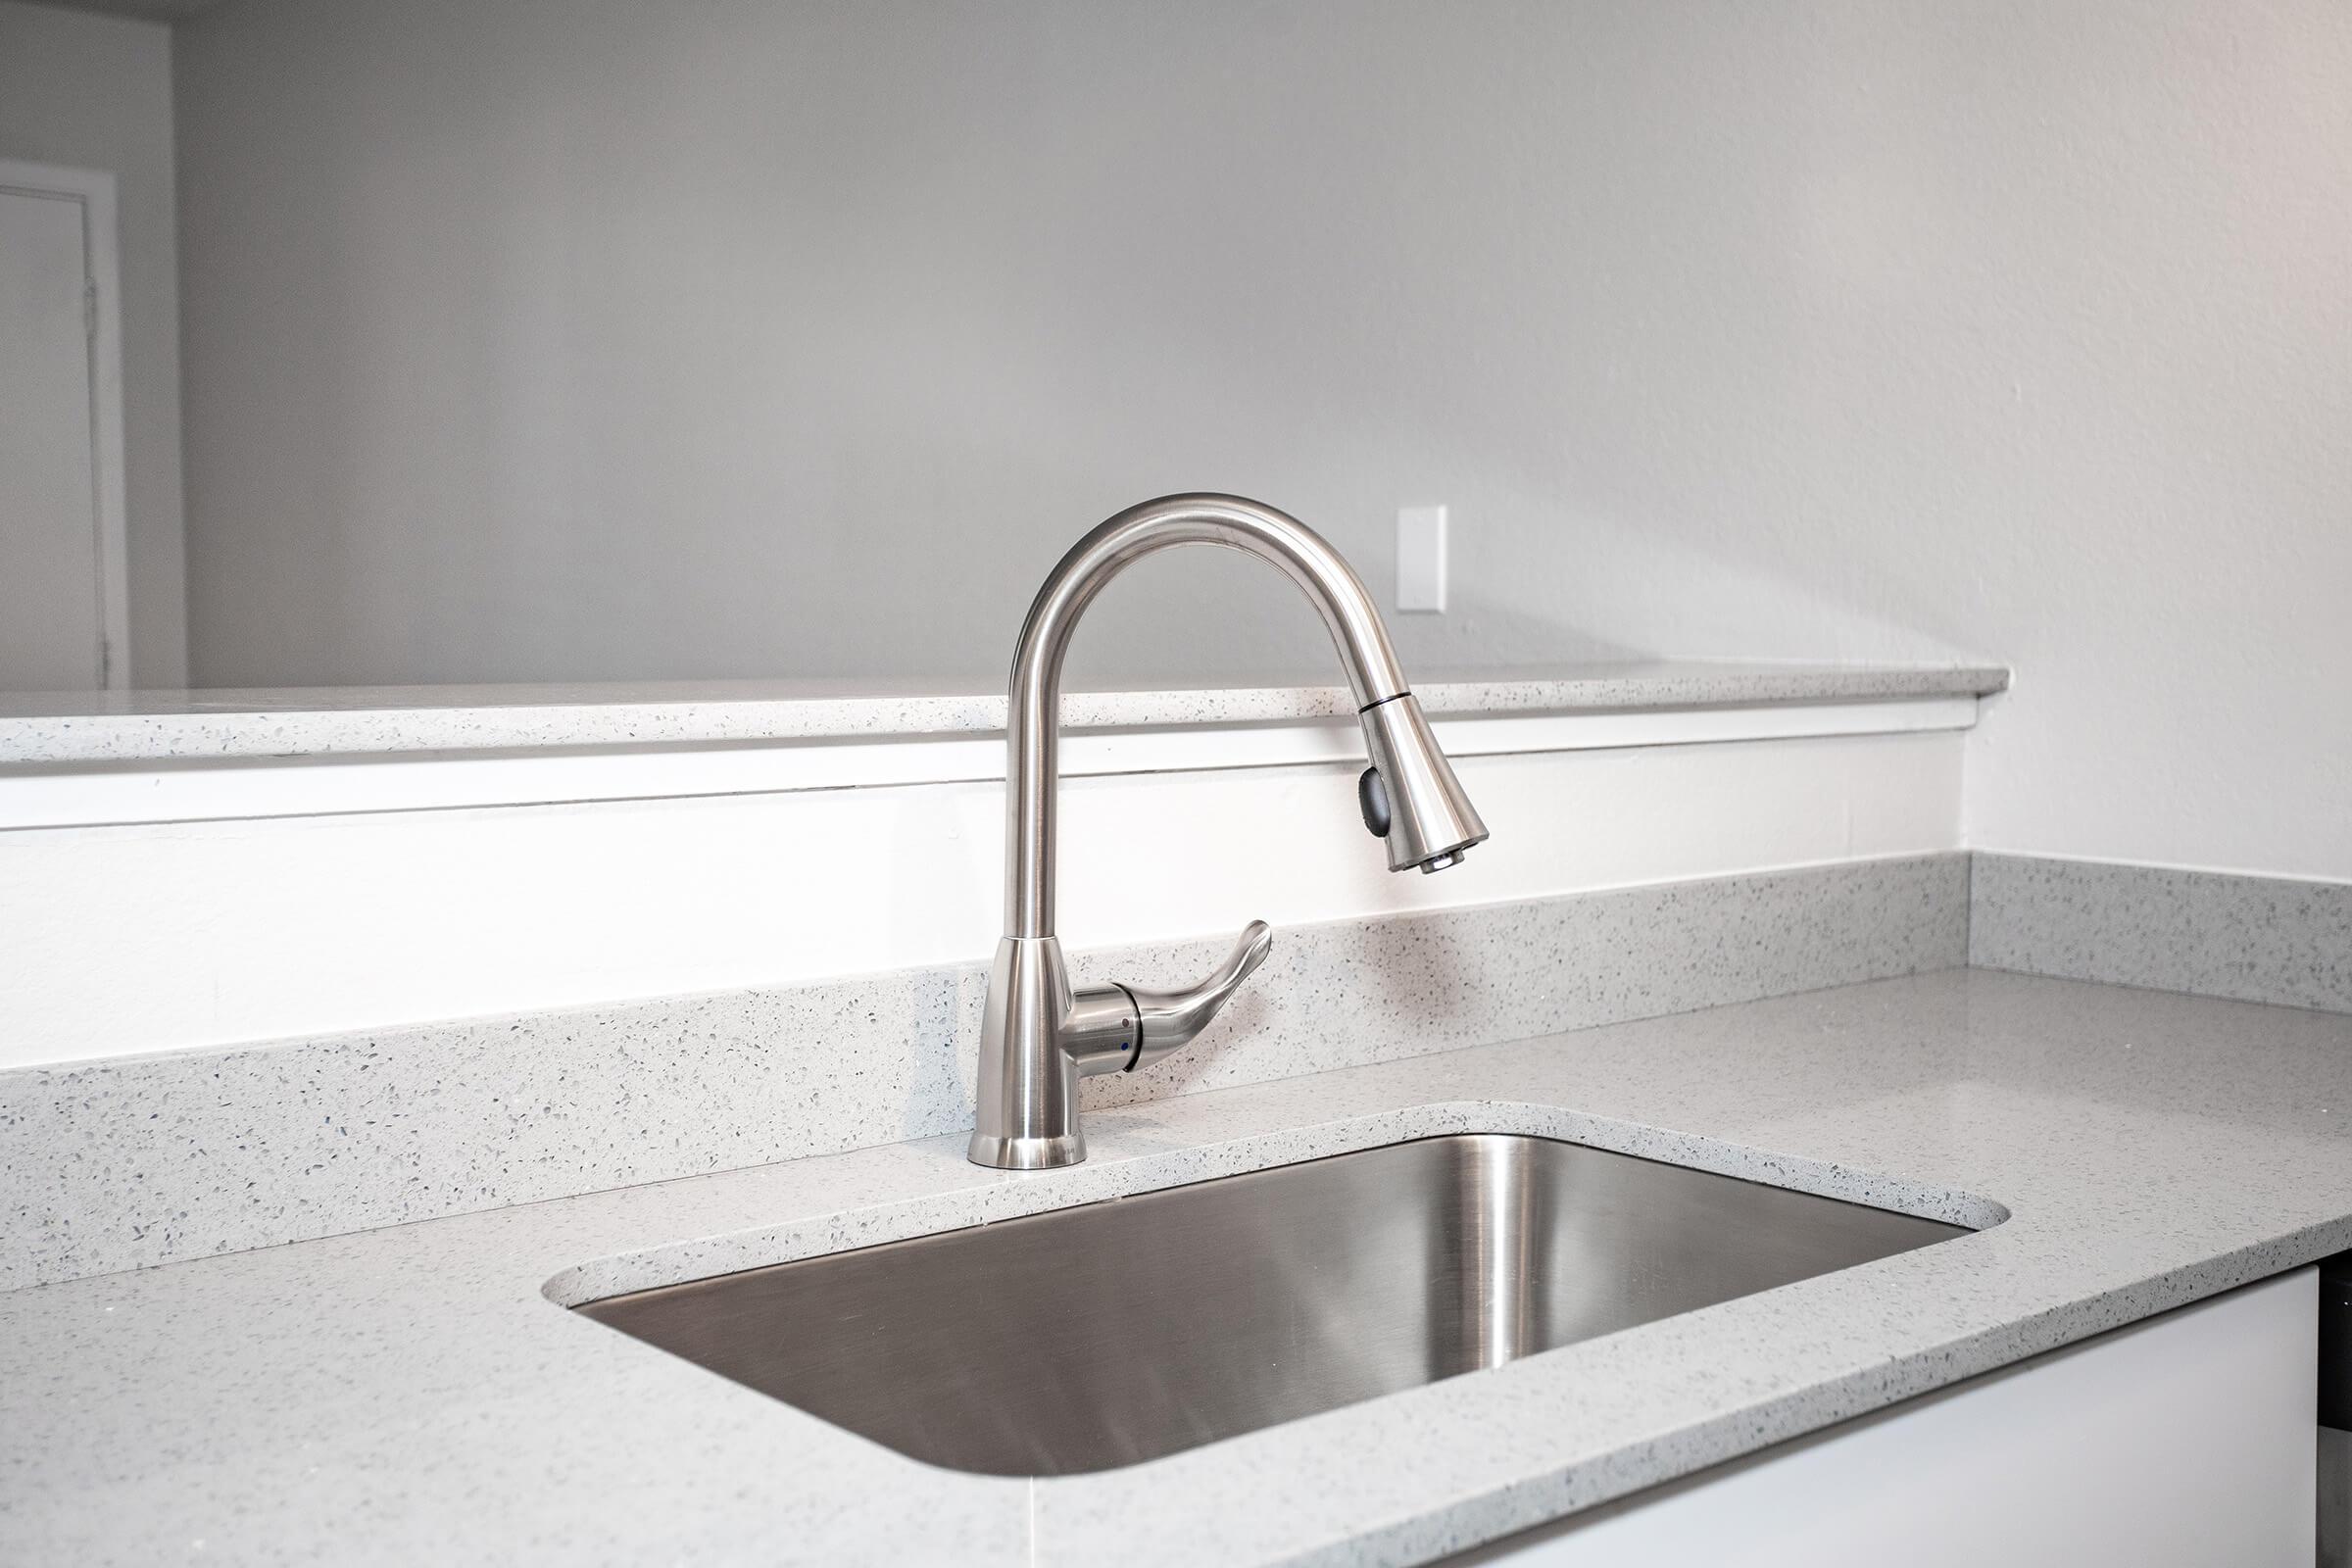 Close up of stainless steel sink and faucet